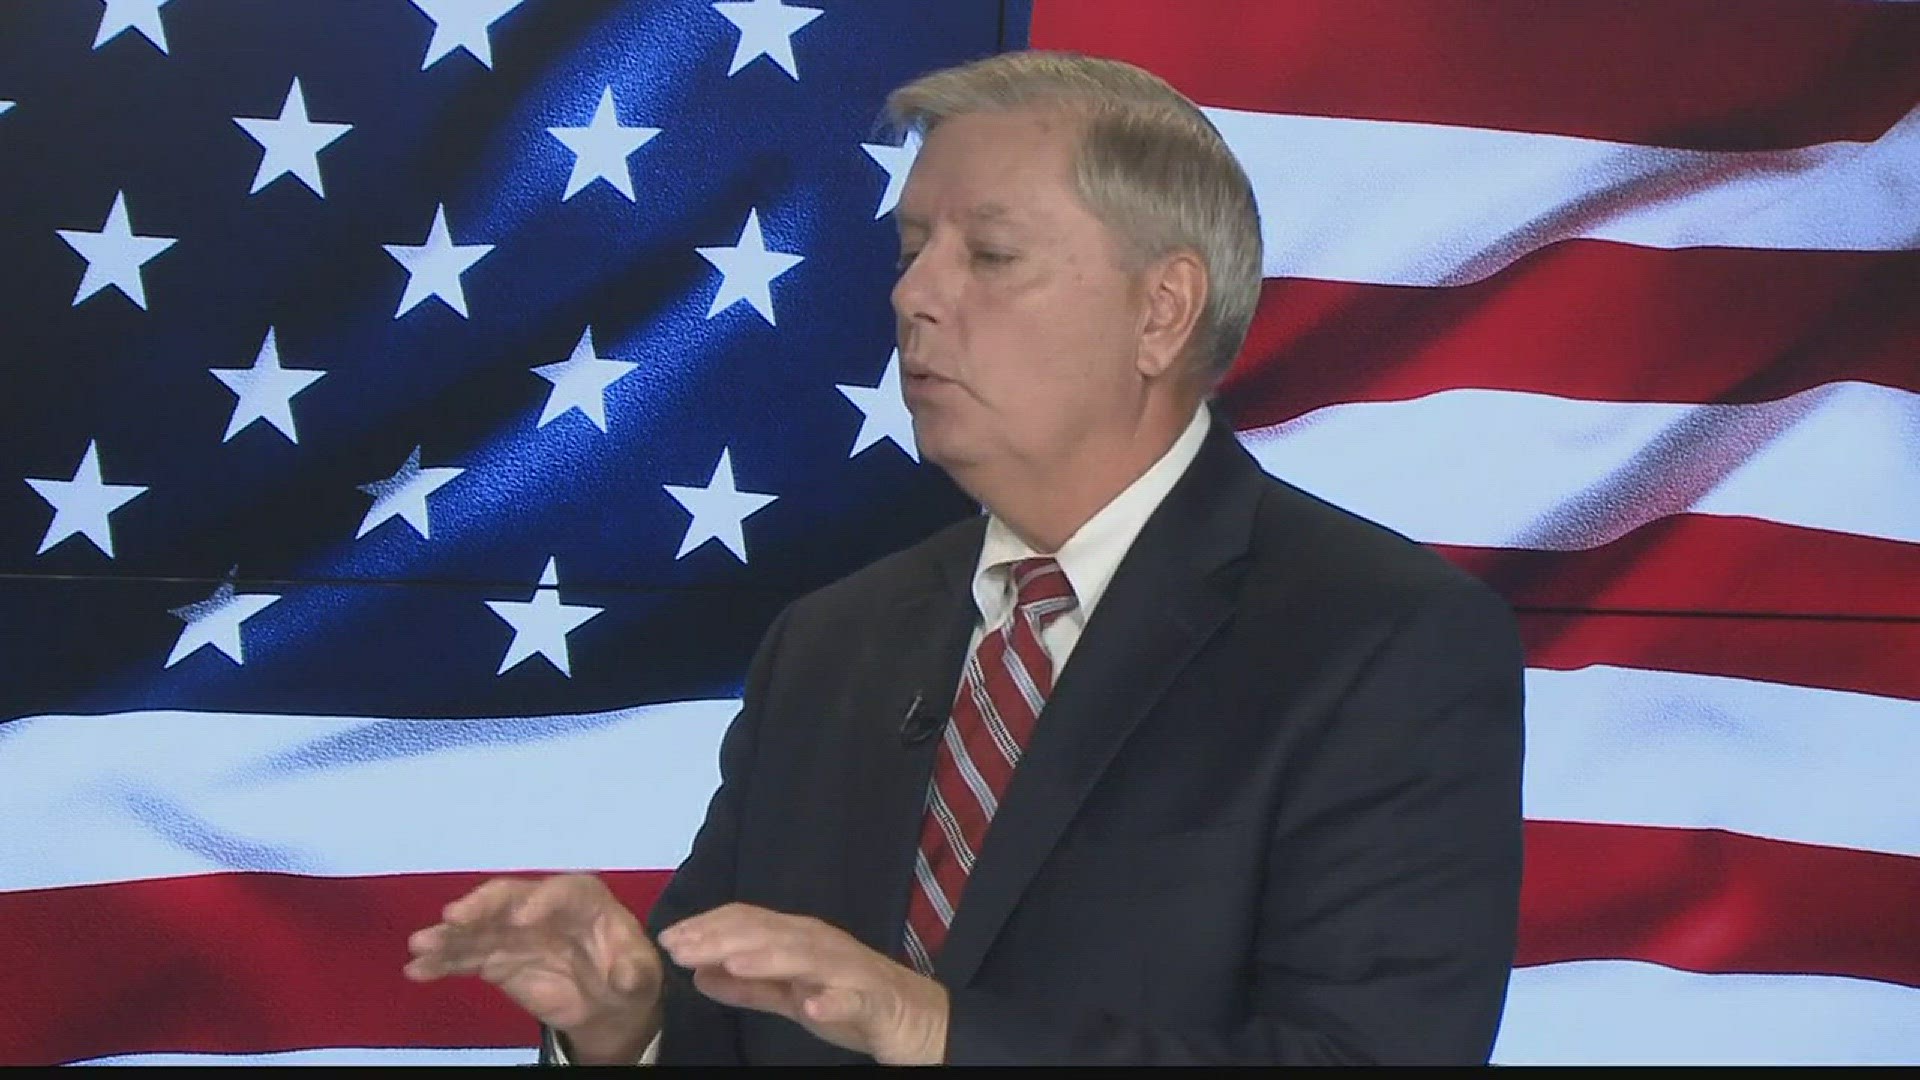 Sen. Graham talks about domestic issues